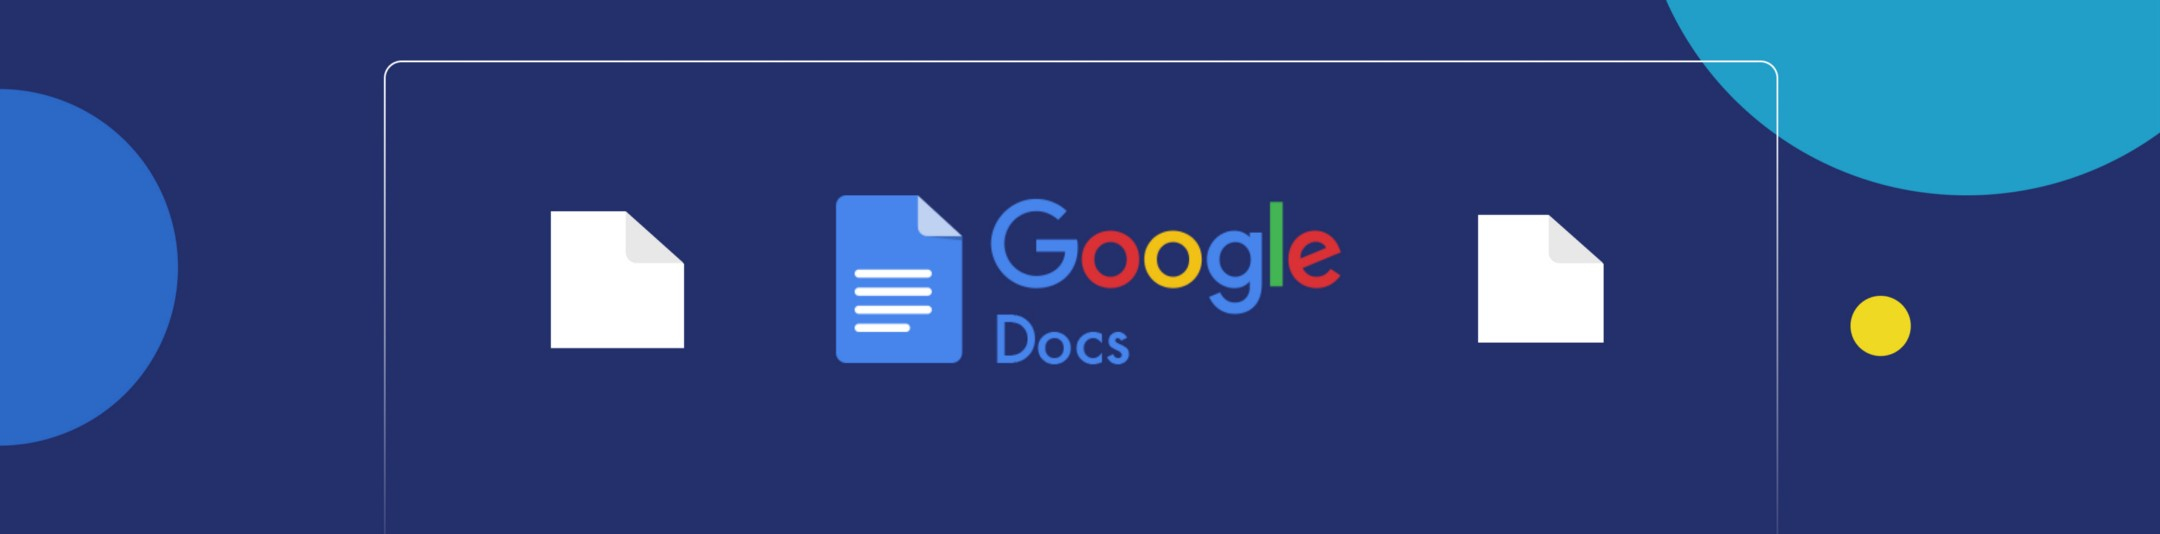 Why using Google Docs as an agile retrospective tool hurts your team cover image